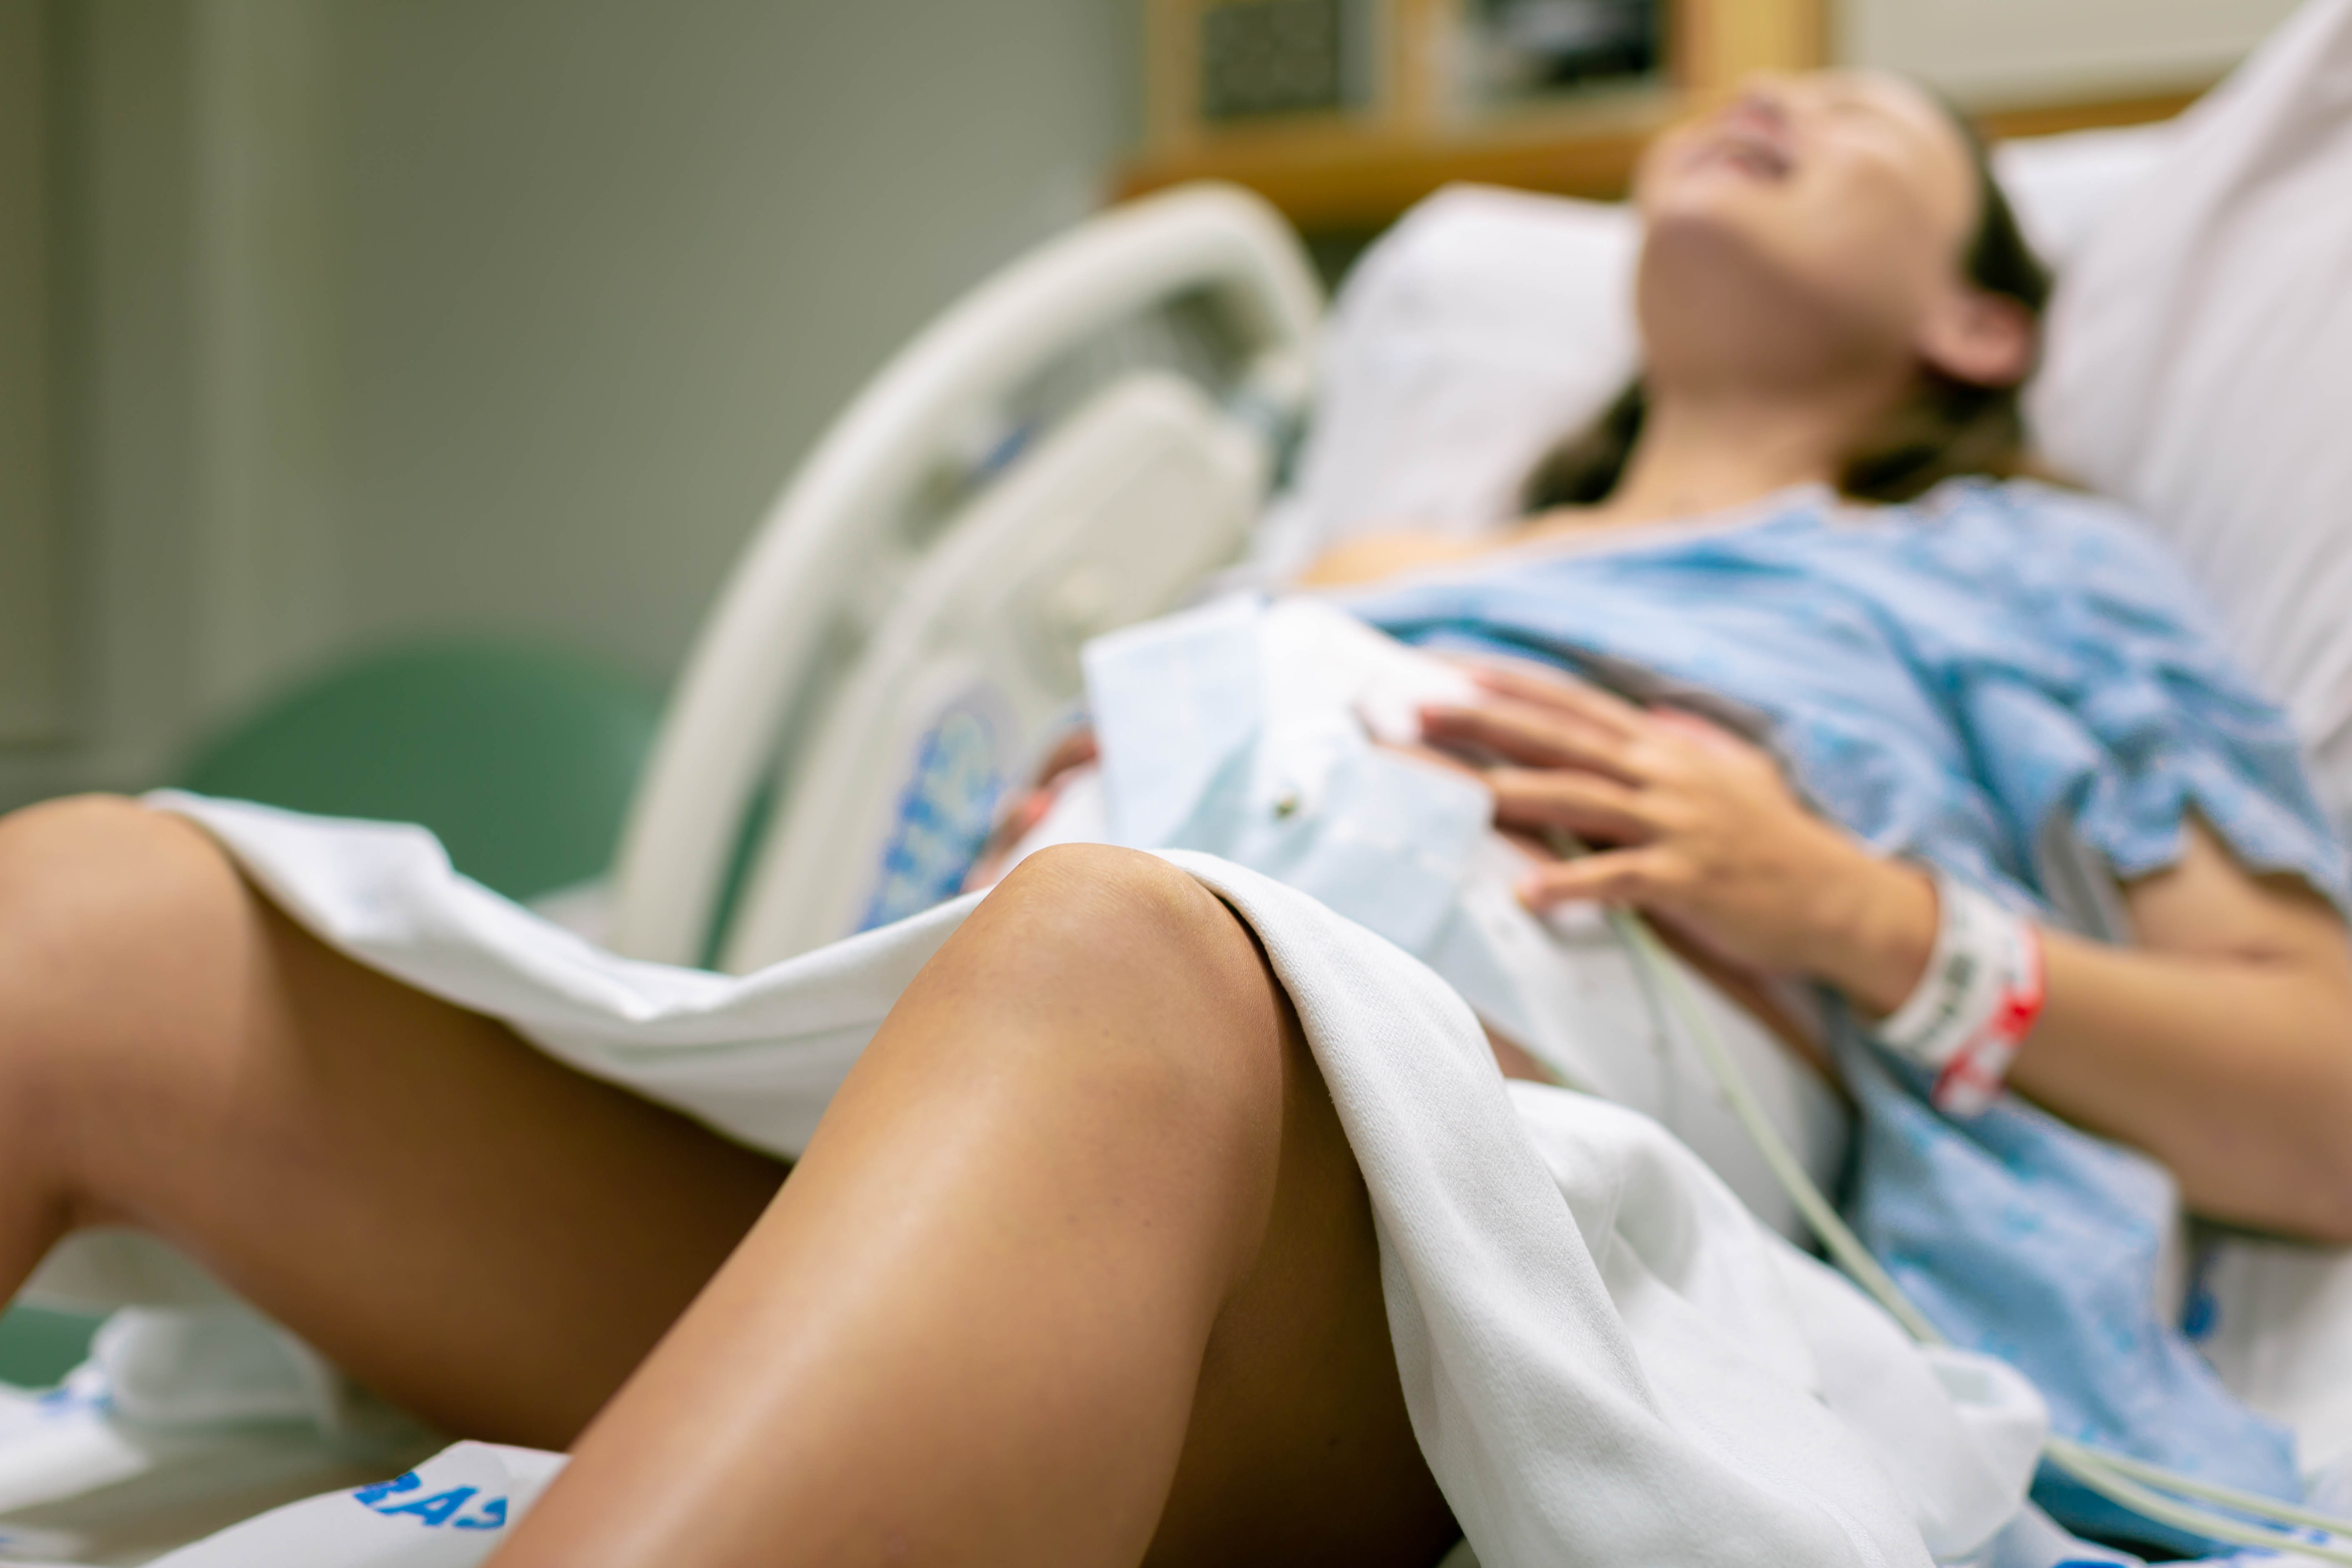 A photo of a woman in labor lying in the hospital bed  | Source: Shutterstock